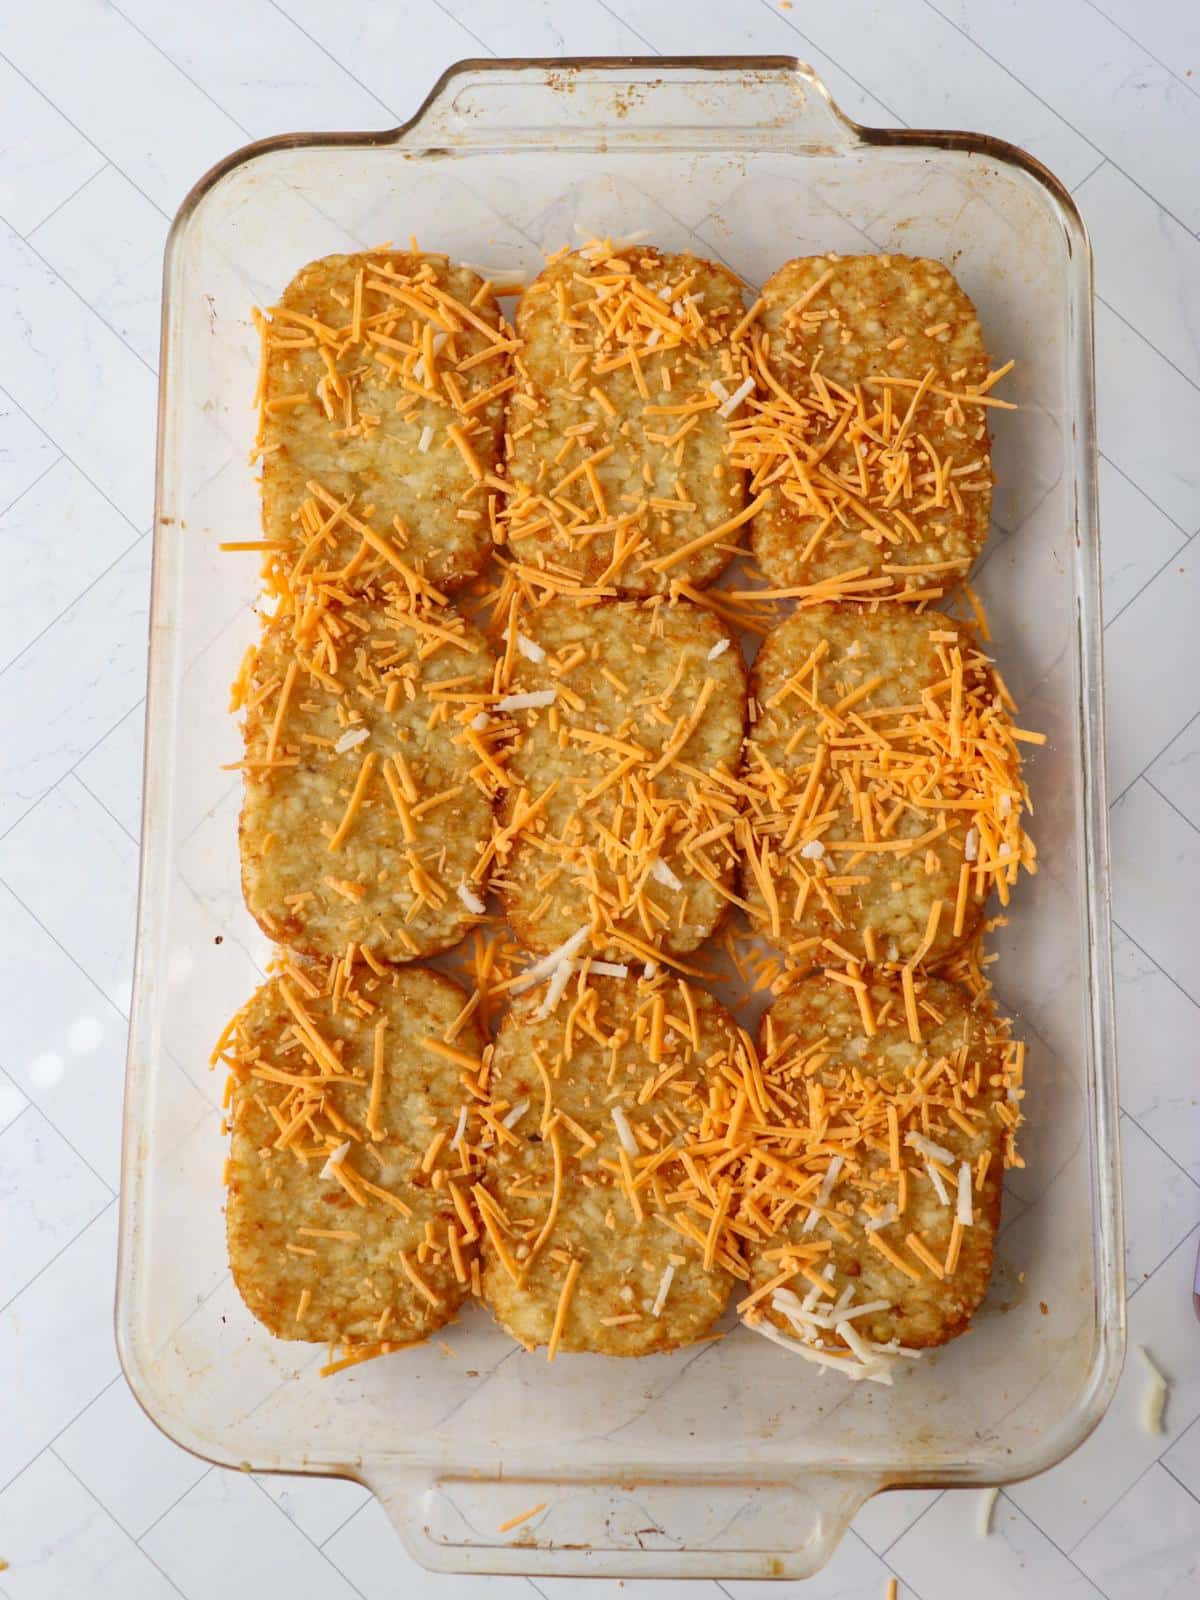 Hash brown patties and vegan cheese in a casserole dish.